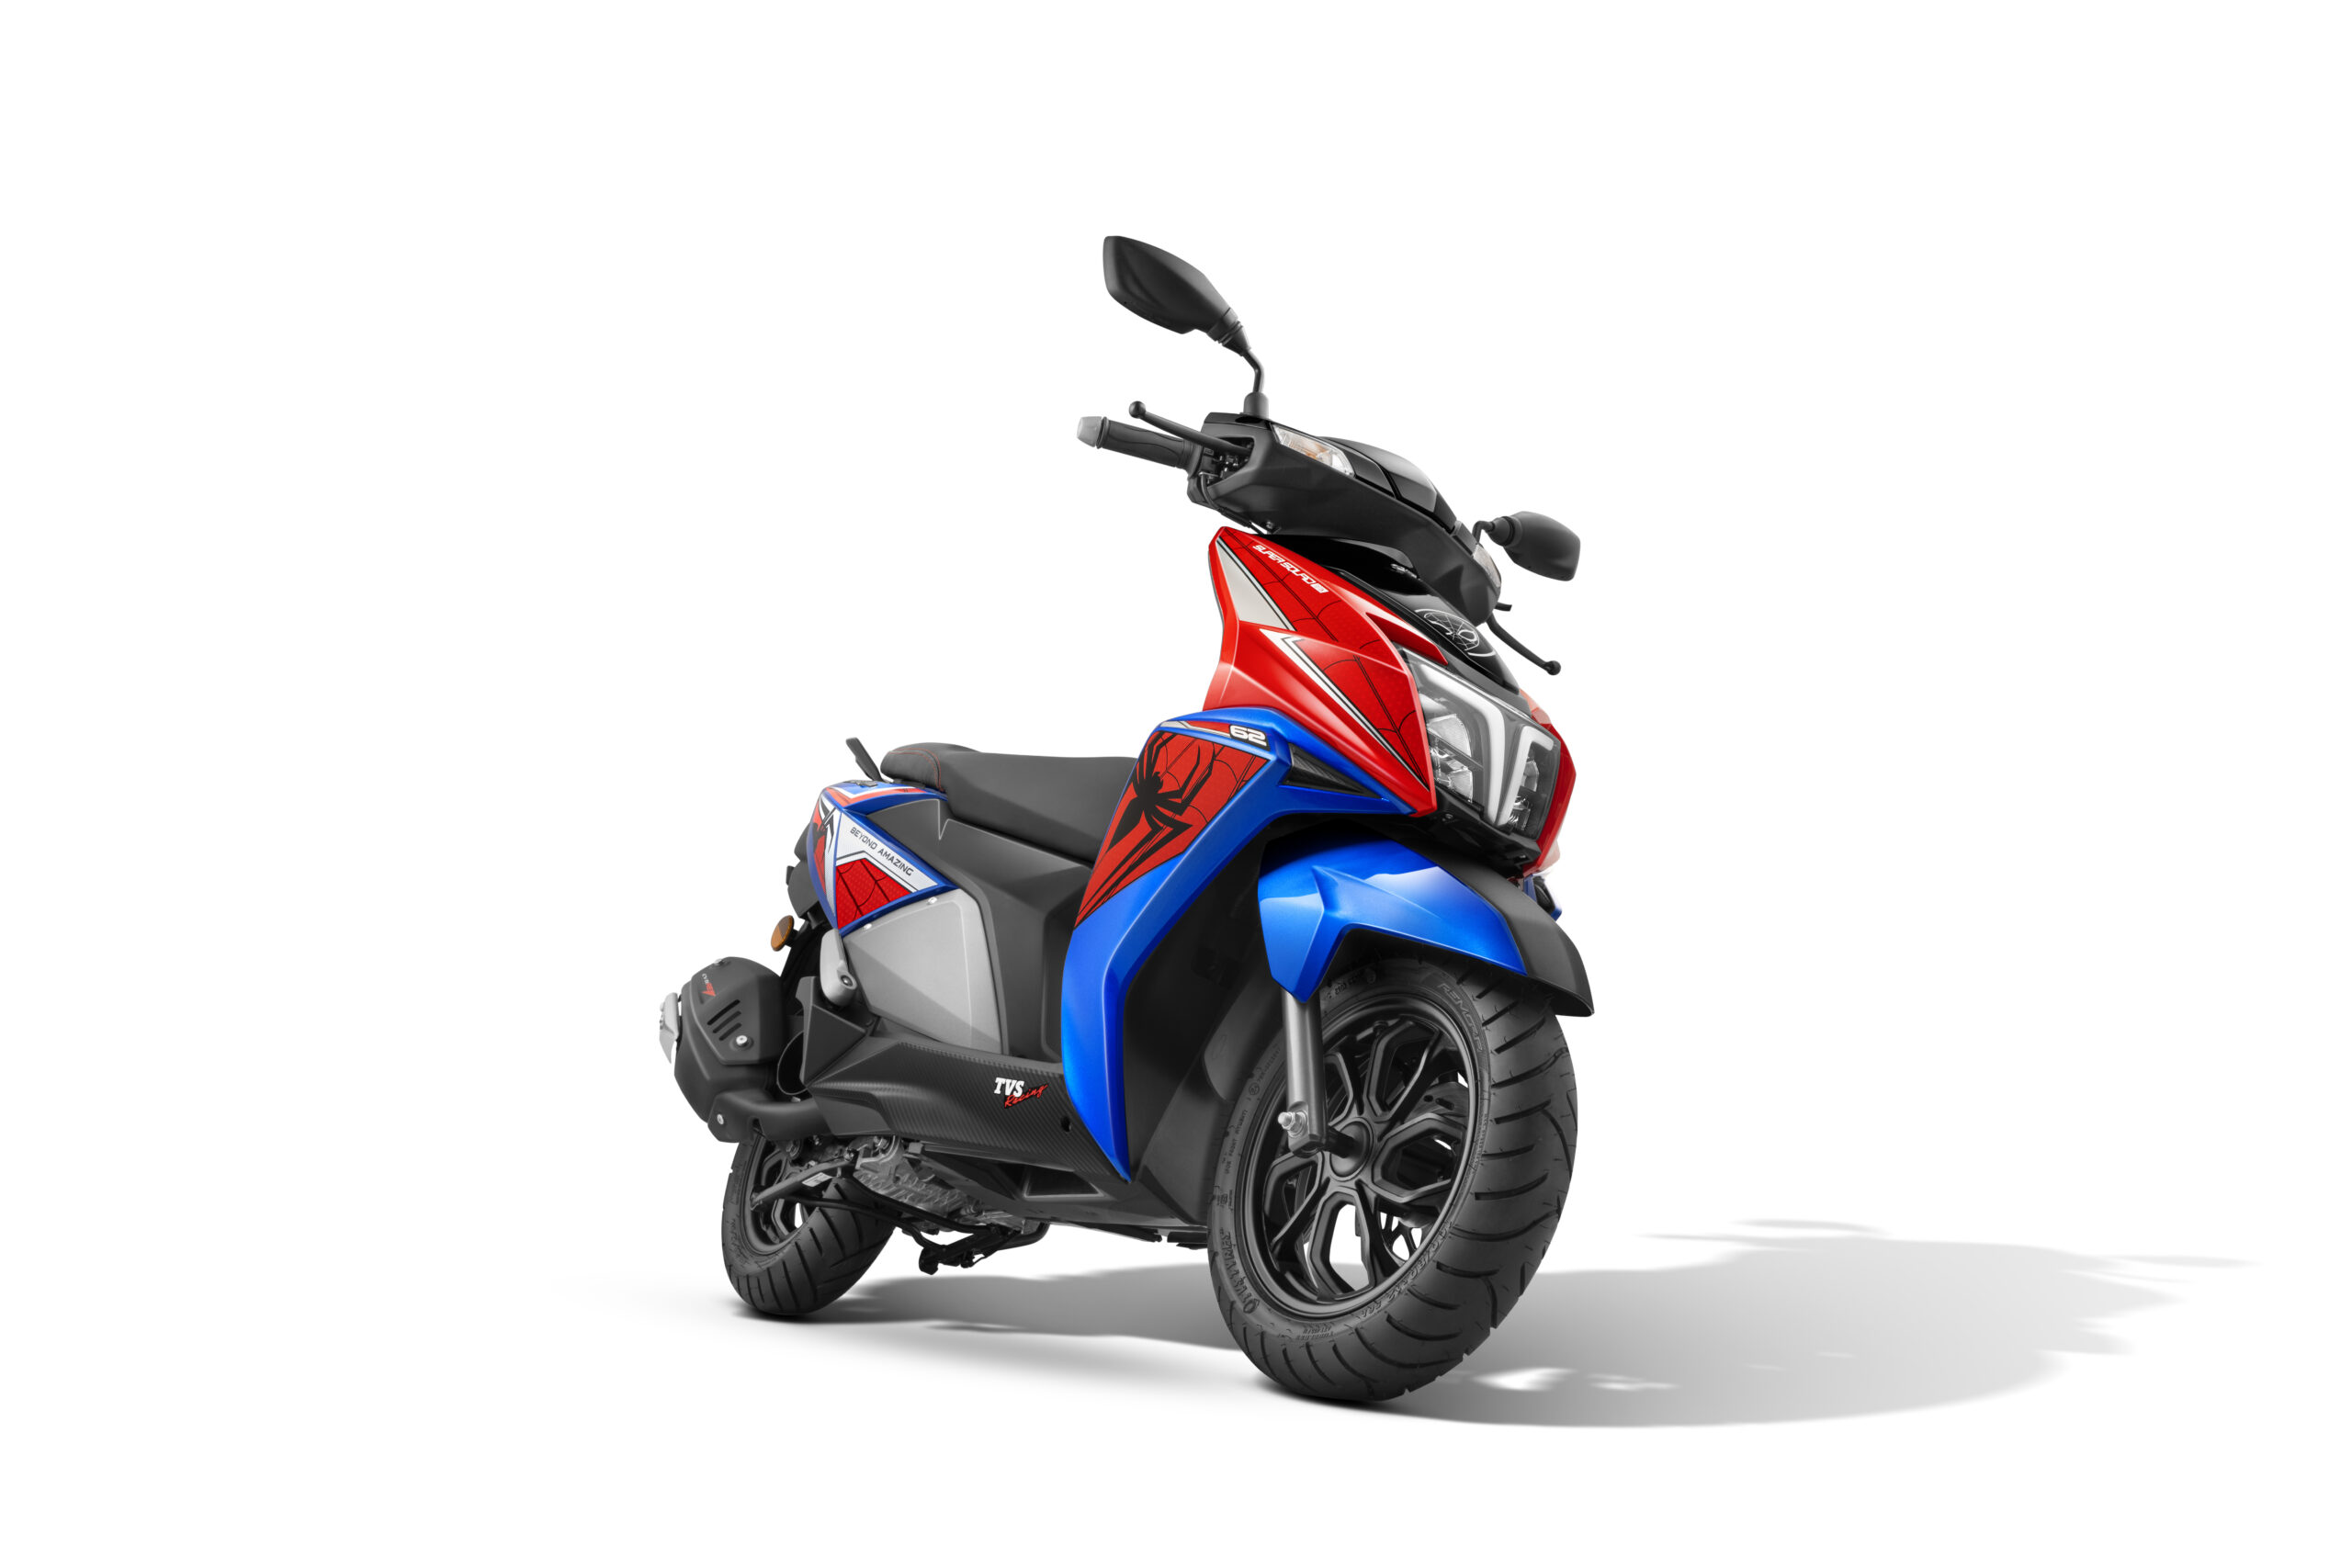 TVS Motor Company launches Marvel Spider-Man, and Thor inspired TVS NTORQ 125 scooters under the SuperSquad edition